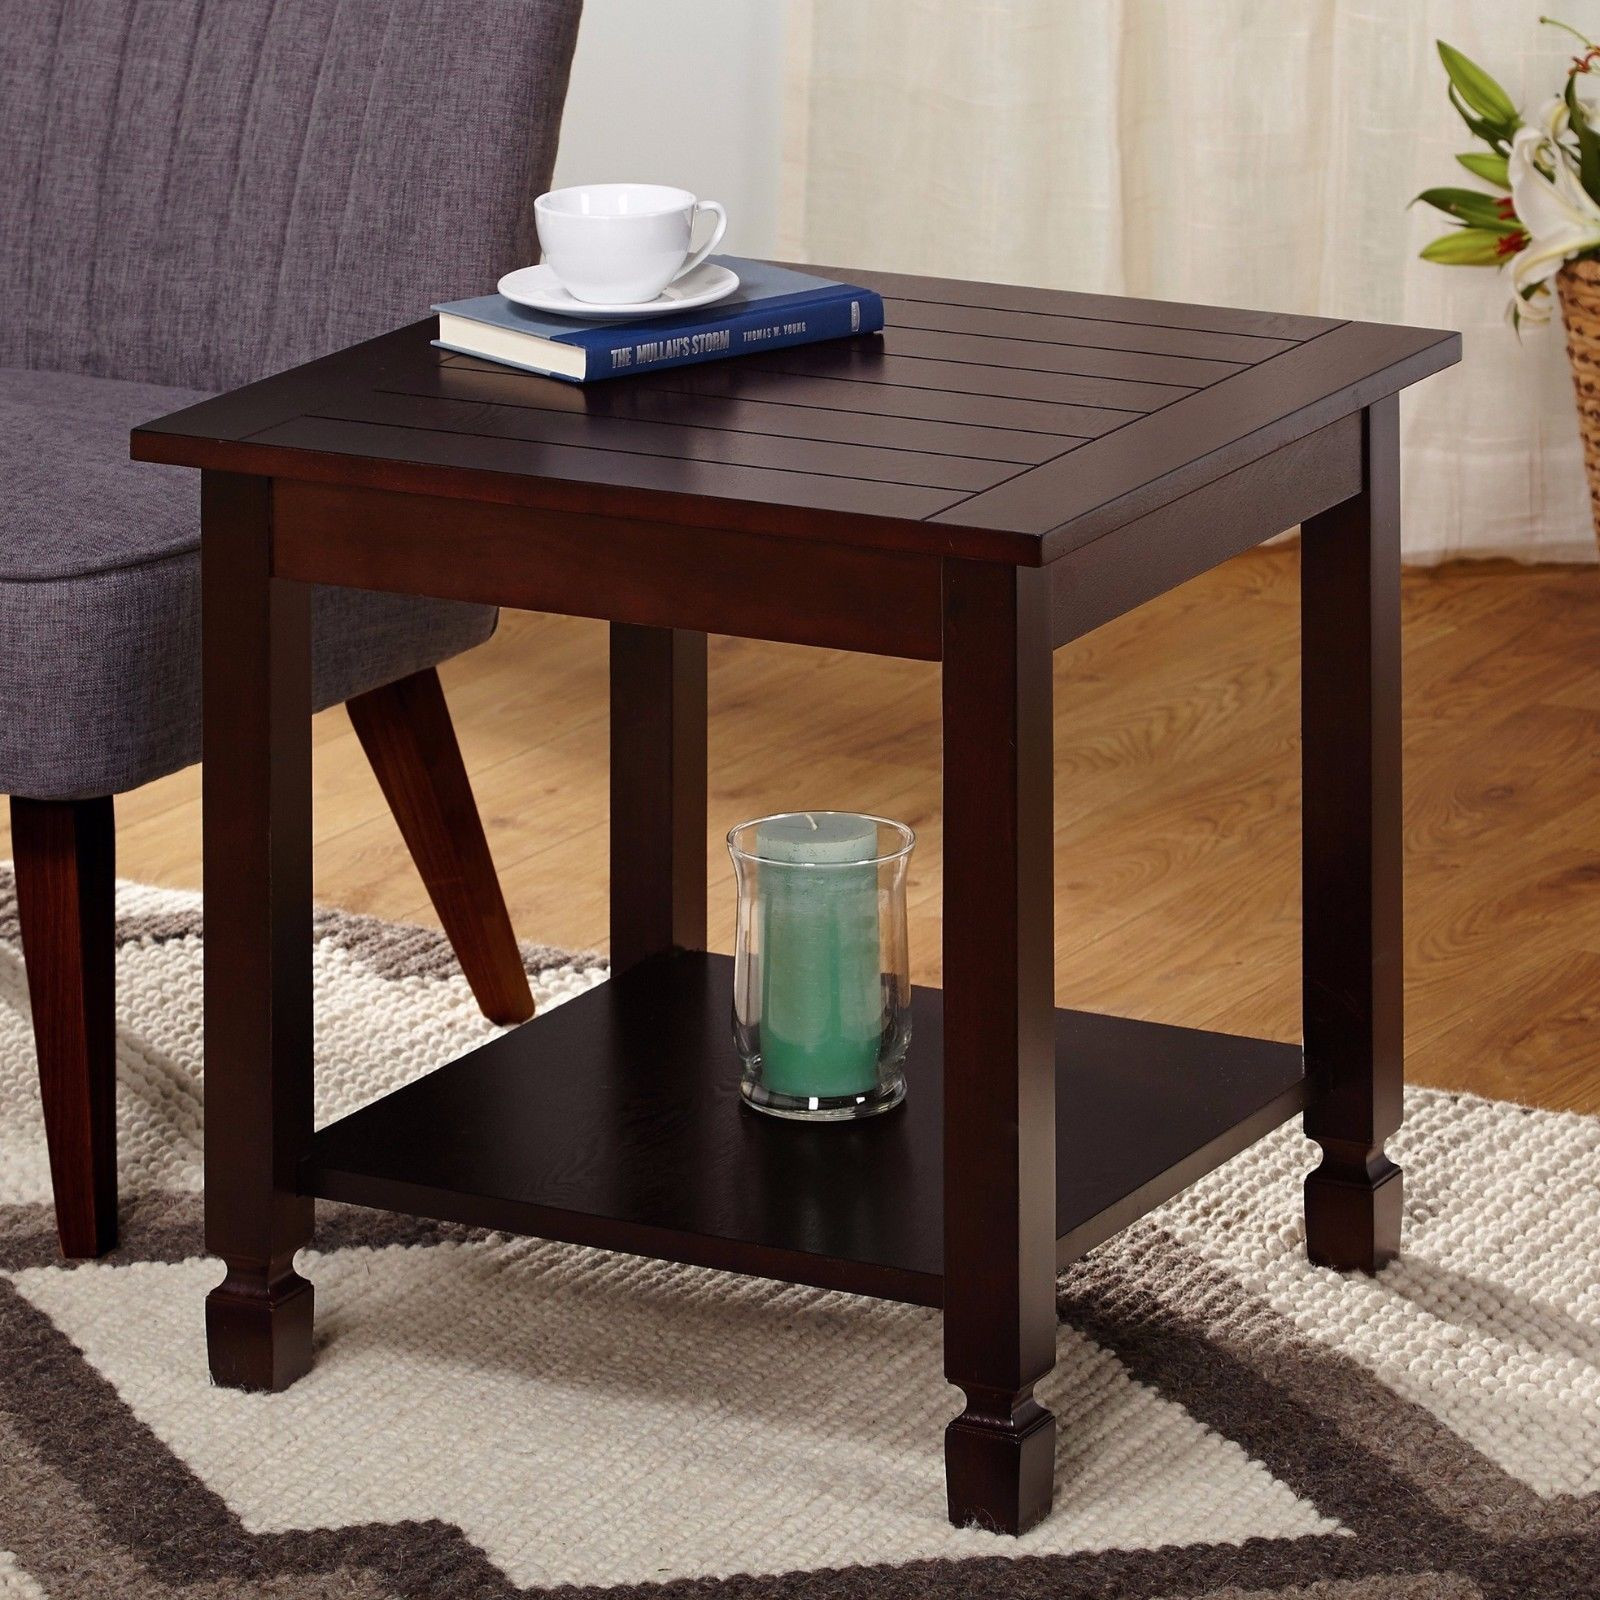 Side Table For Living Room
 Espresso Finish Square End Table with Lower Shelf Living